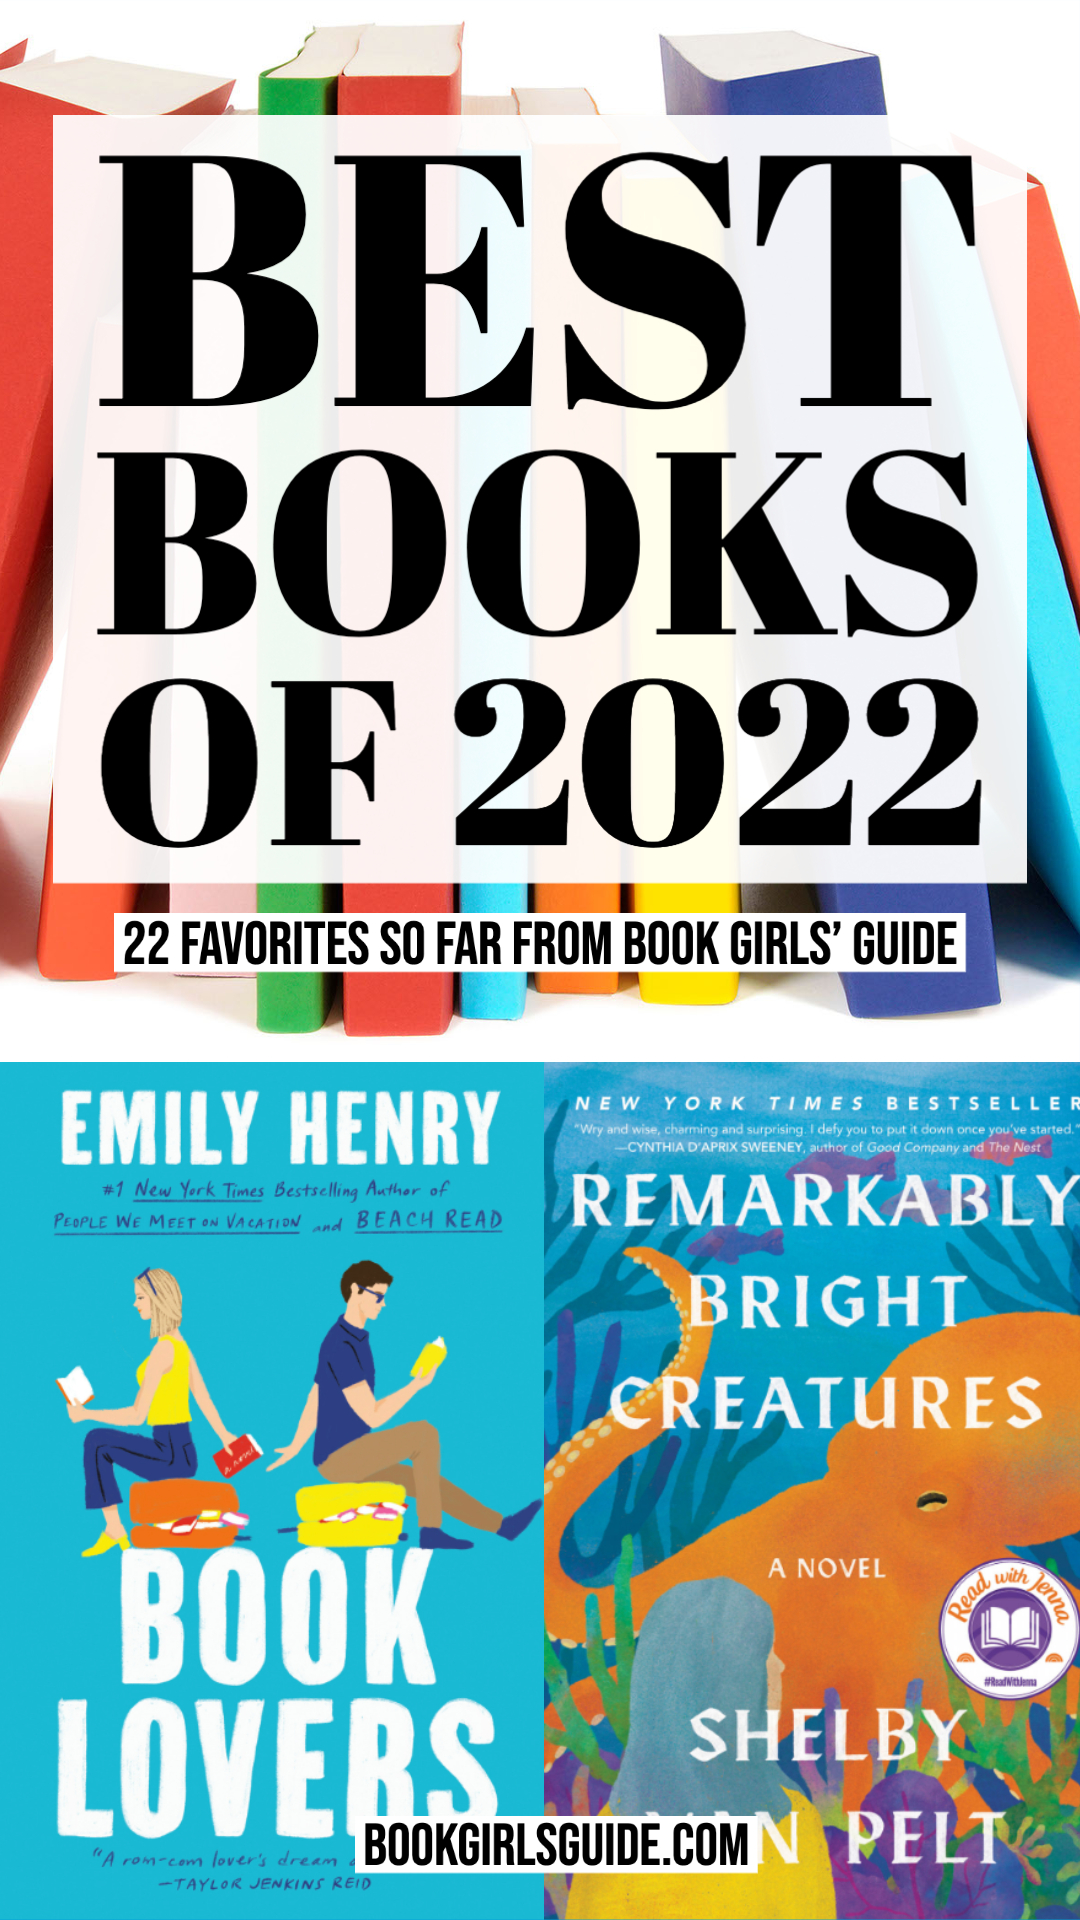 Two book covers (Remarkably Bright Creatures, Book Lovers) with the text: Best Books of 2022